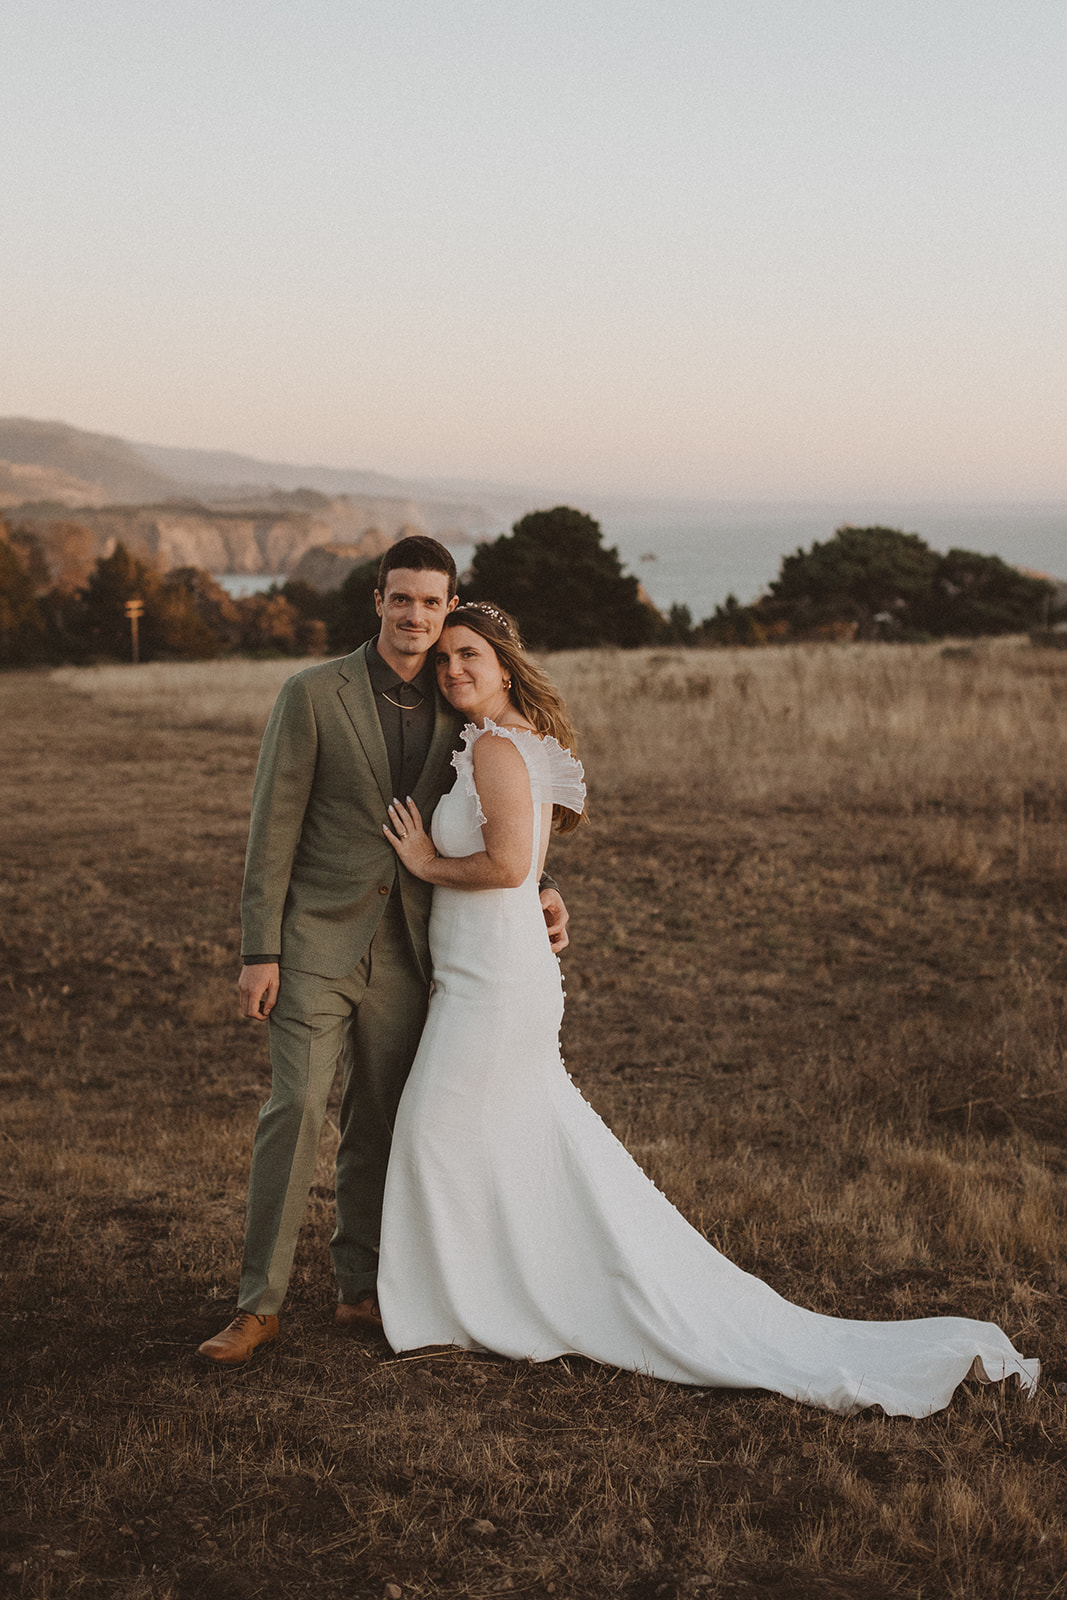 Sunset photo with bride and groom in Elk, CA